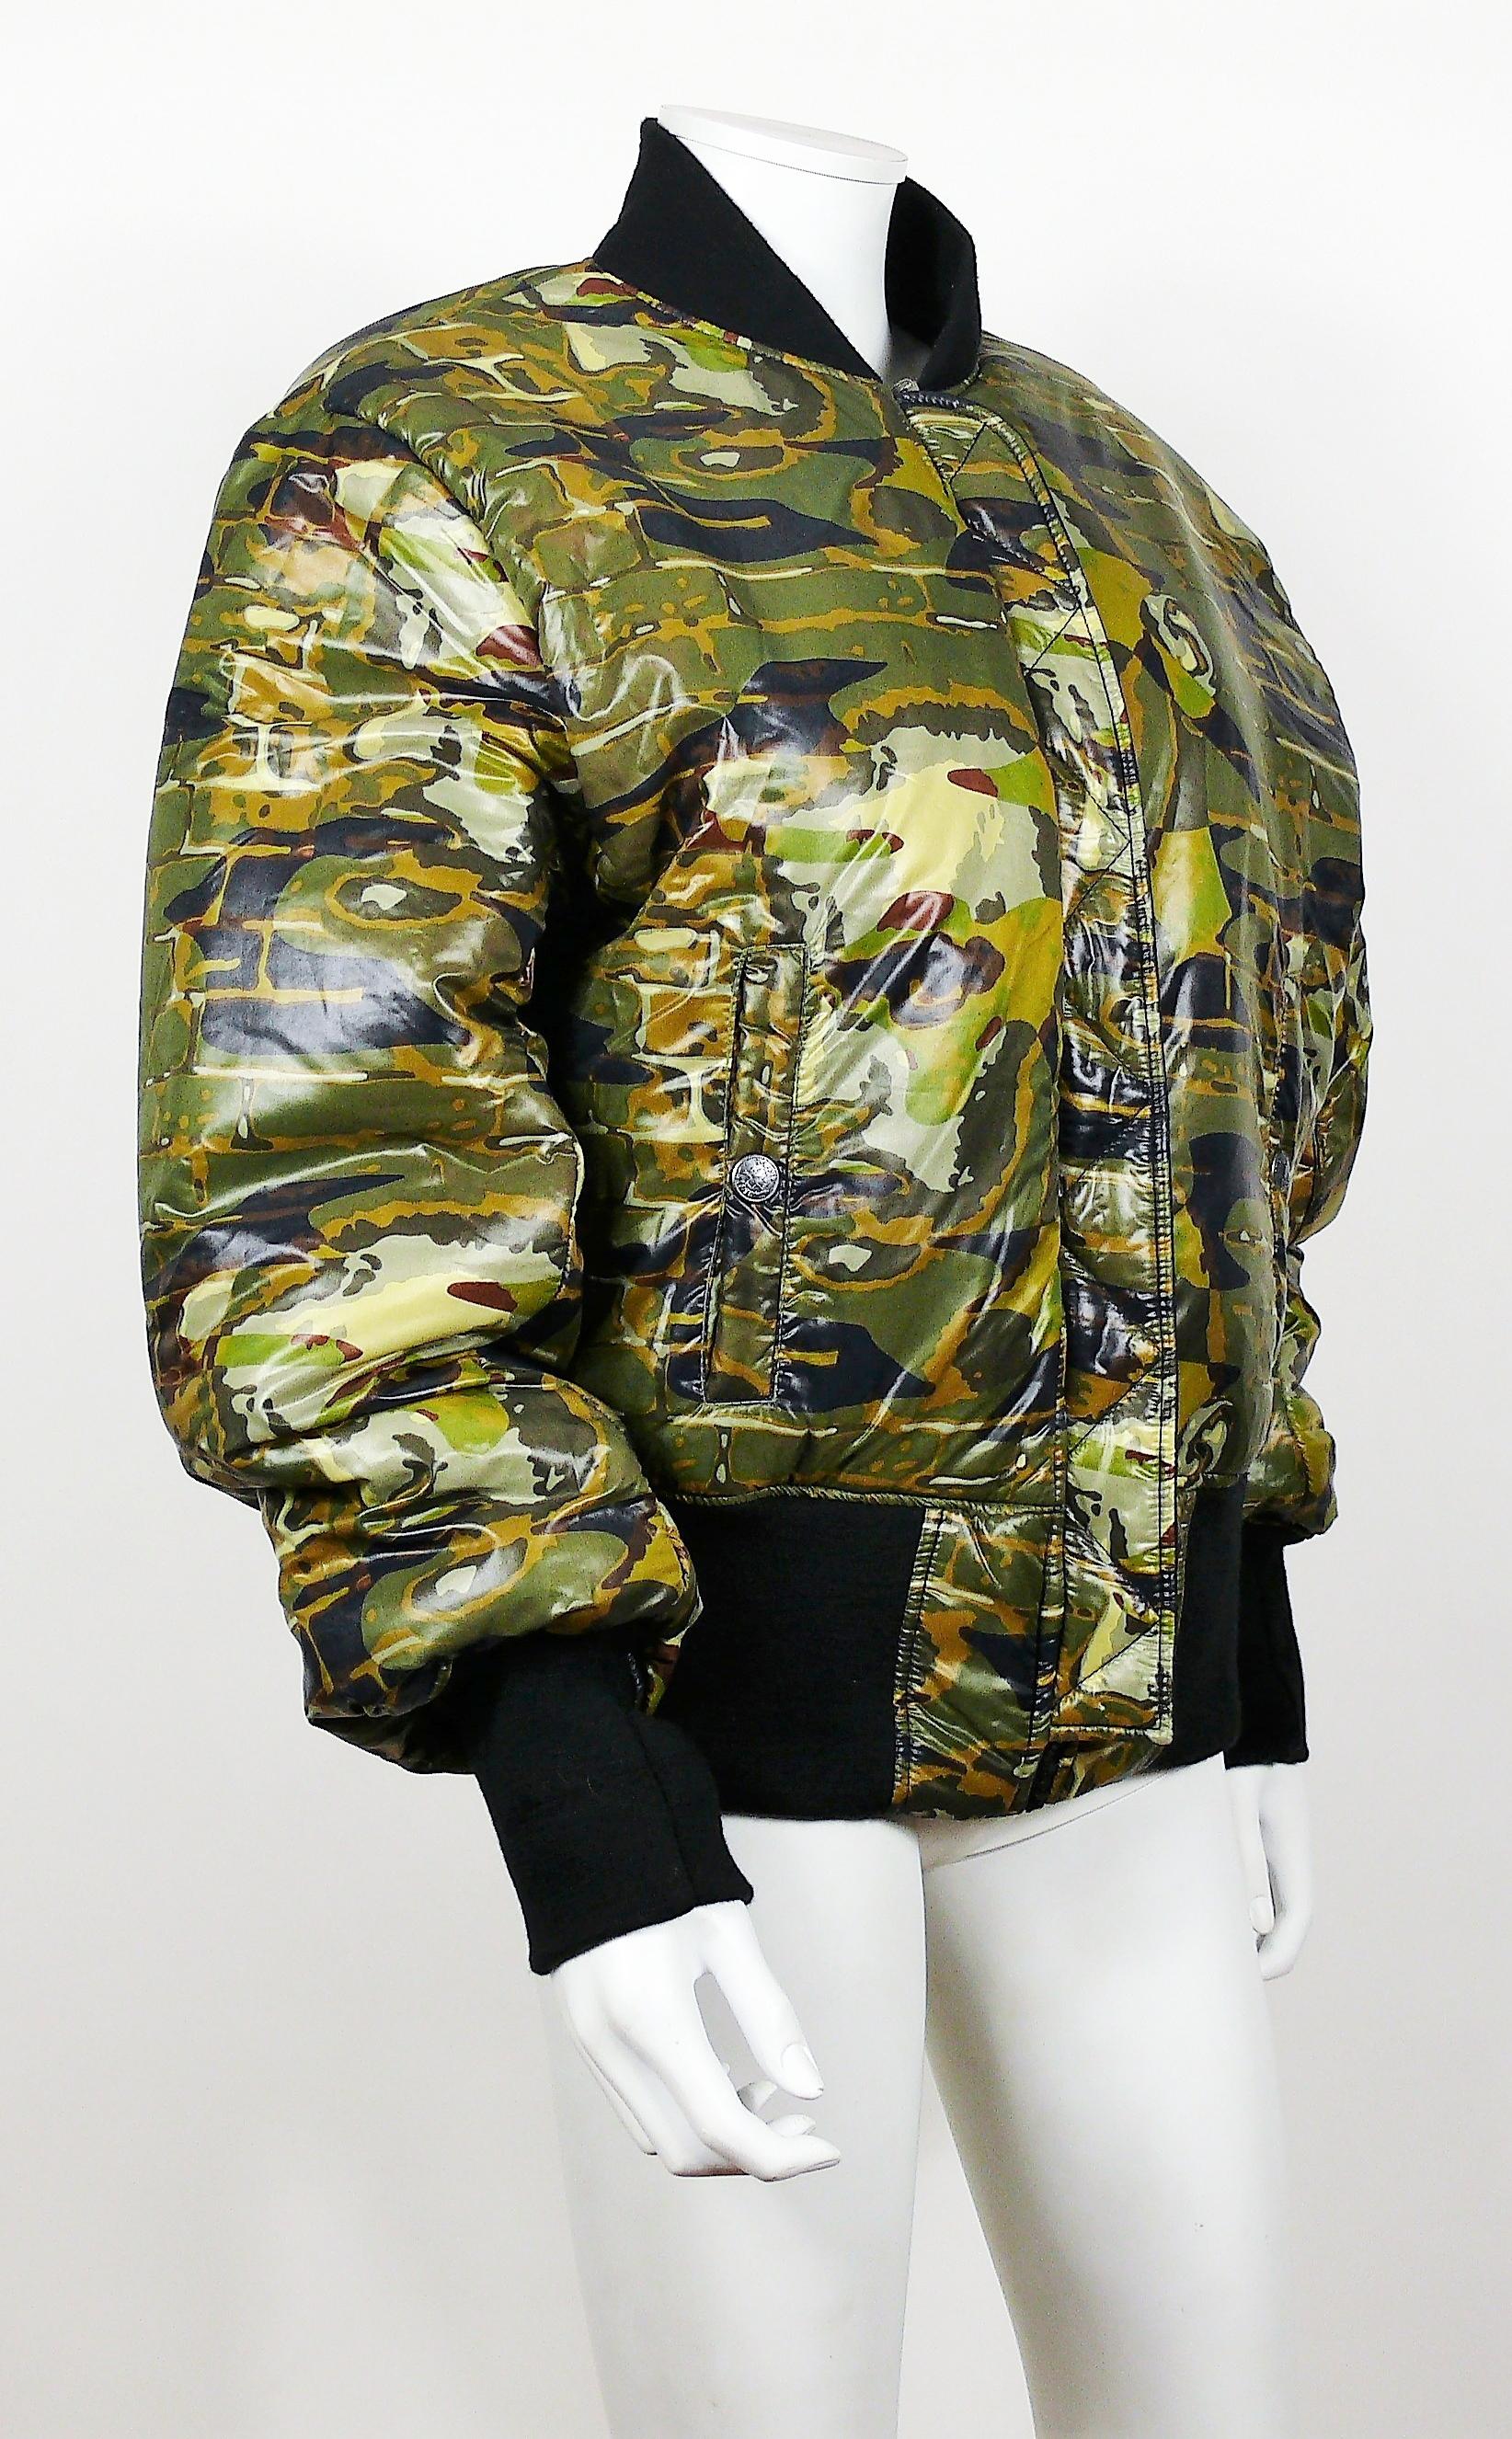 JEAN PAUL GAULTIER vintage reversible bomber jacket featuring a camouflage design with faces on one side, black nylon on the other side.

Label reads GAULTIER JEAN'S.

Missing size tag.
Please refer to measurements.

Missing composition